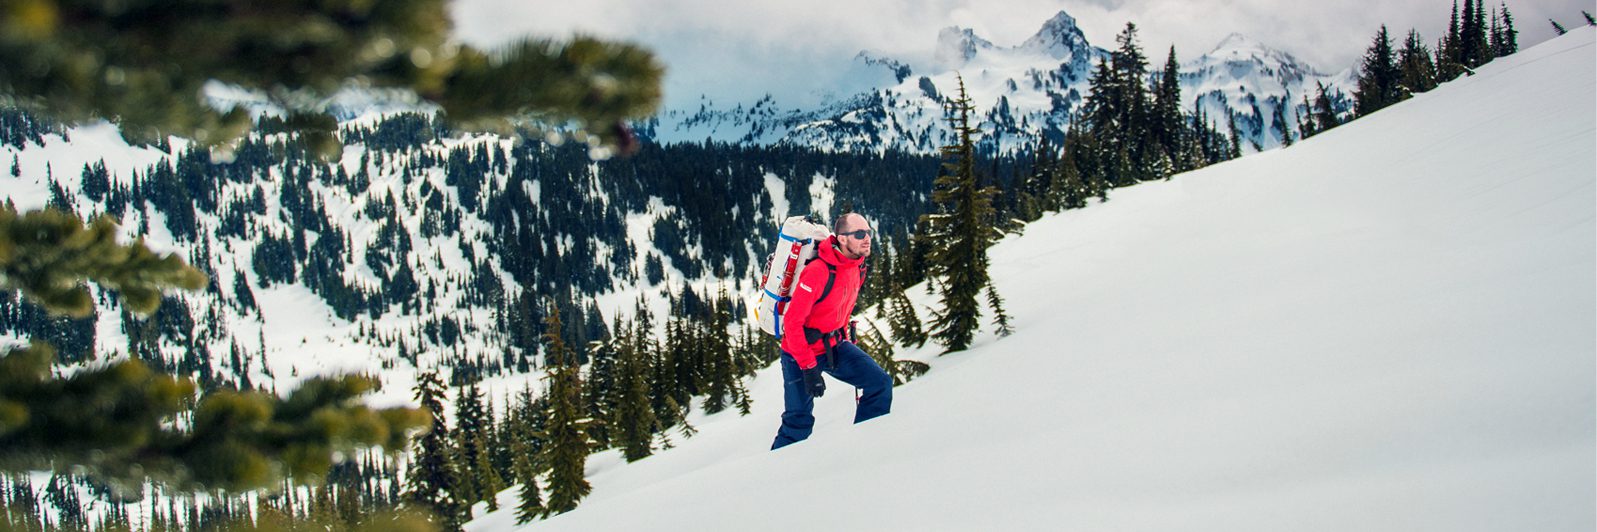 Man in red jacket climbs up a snow-covered mountains